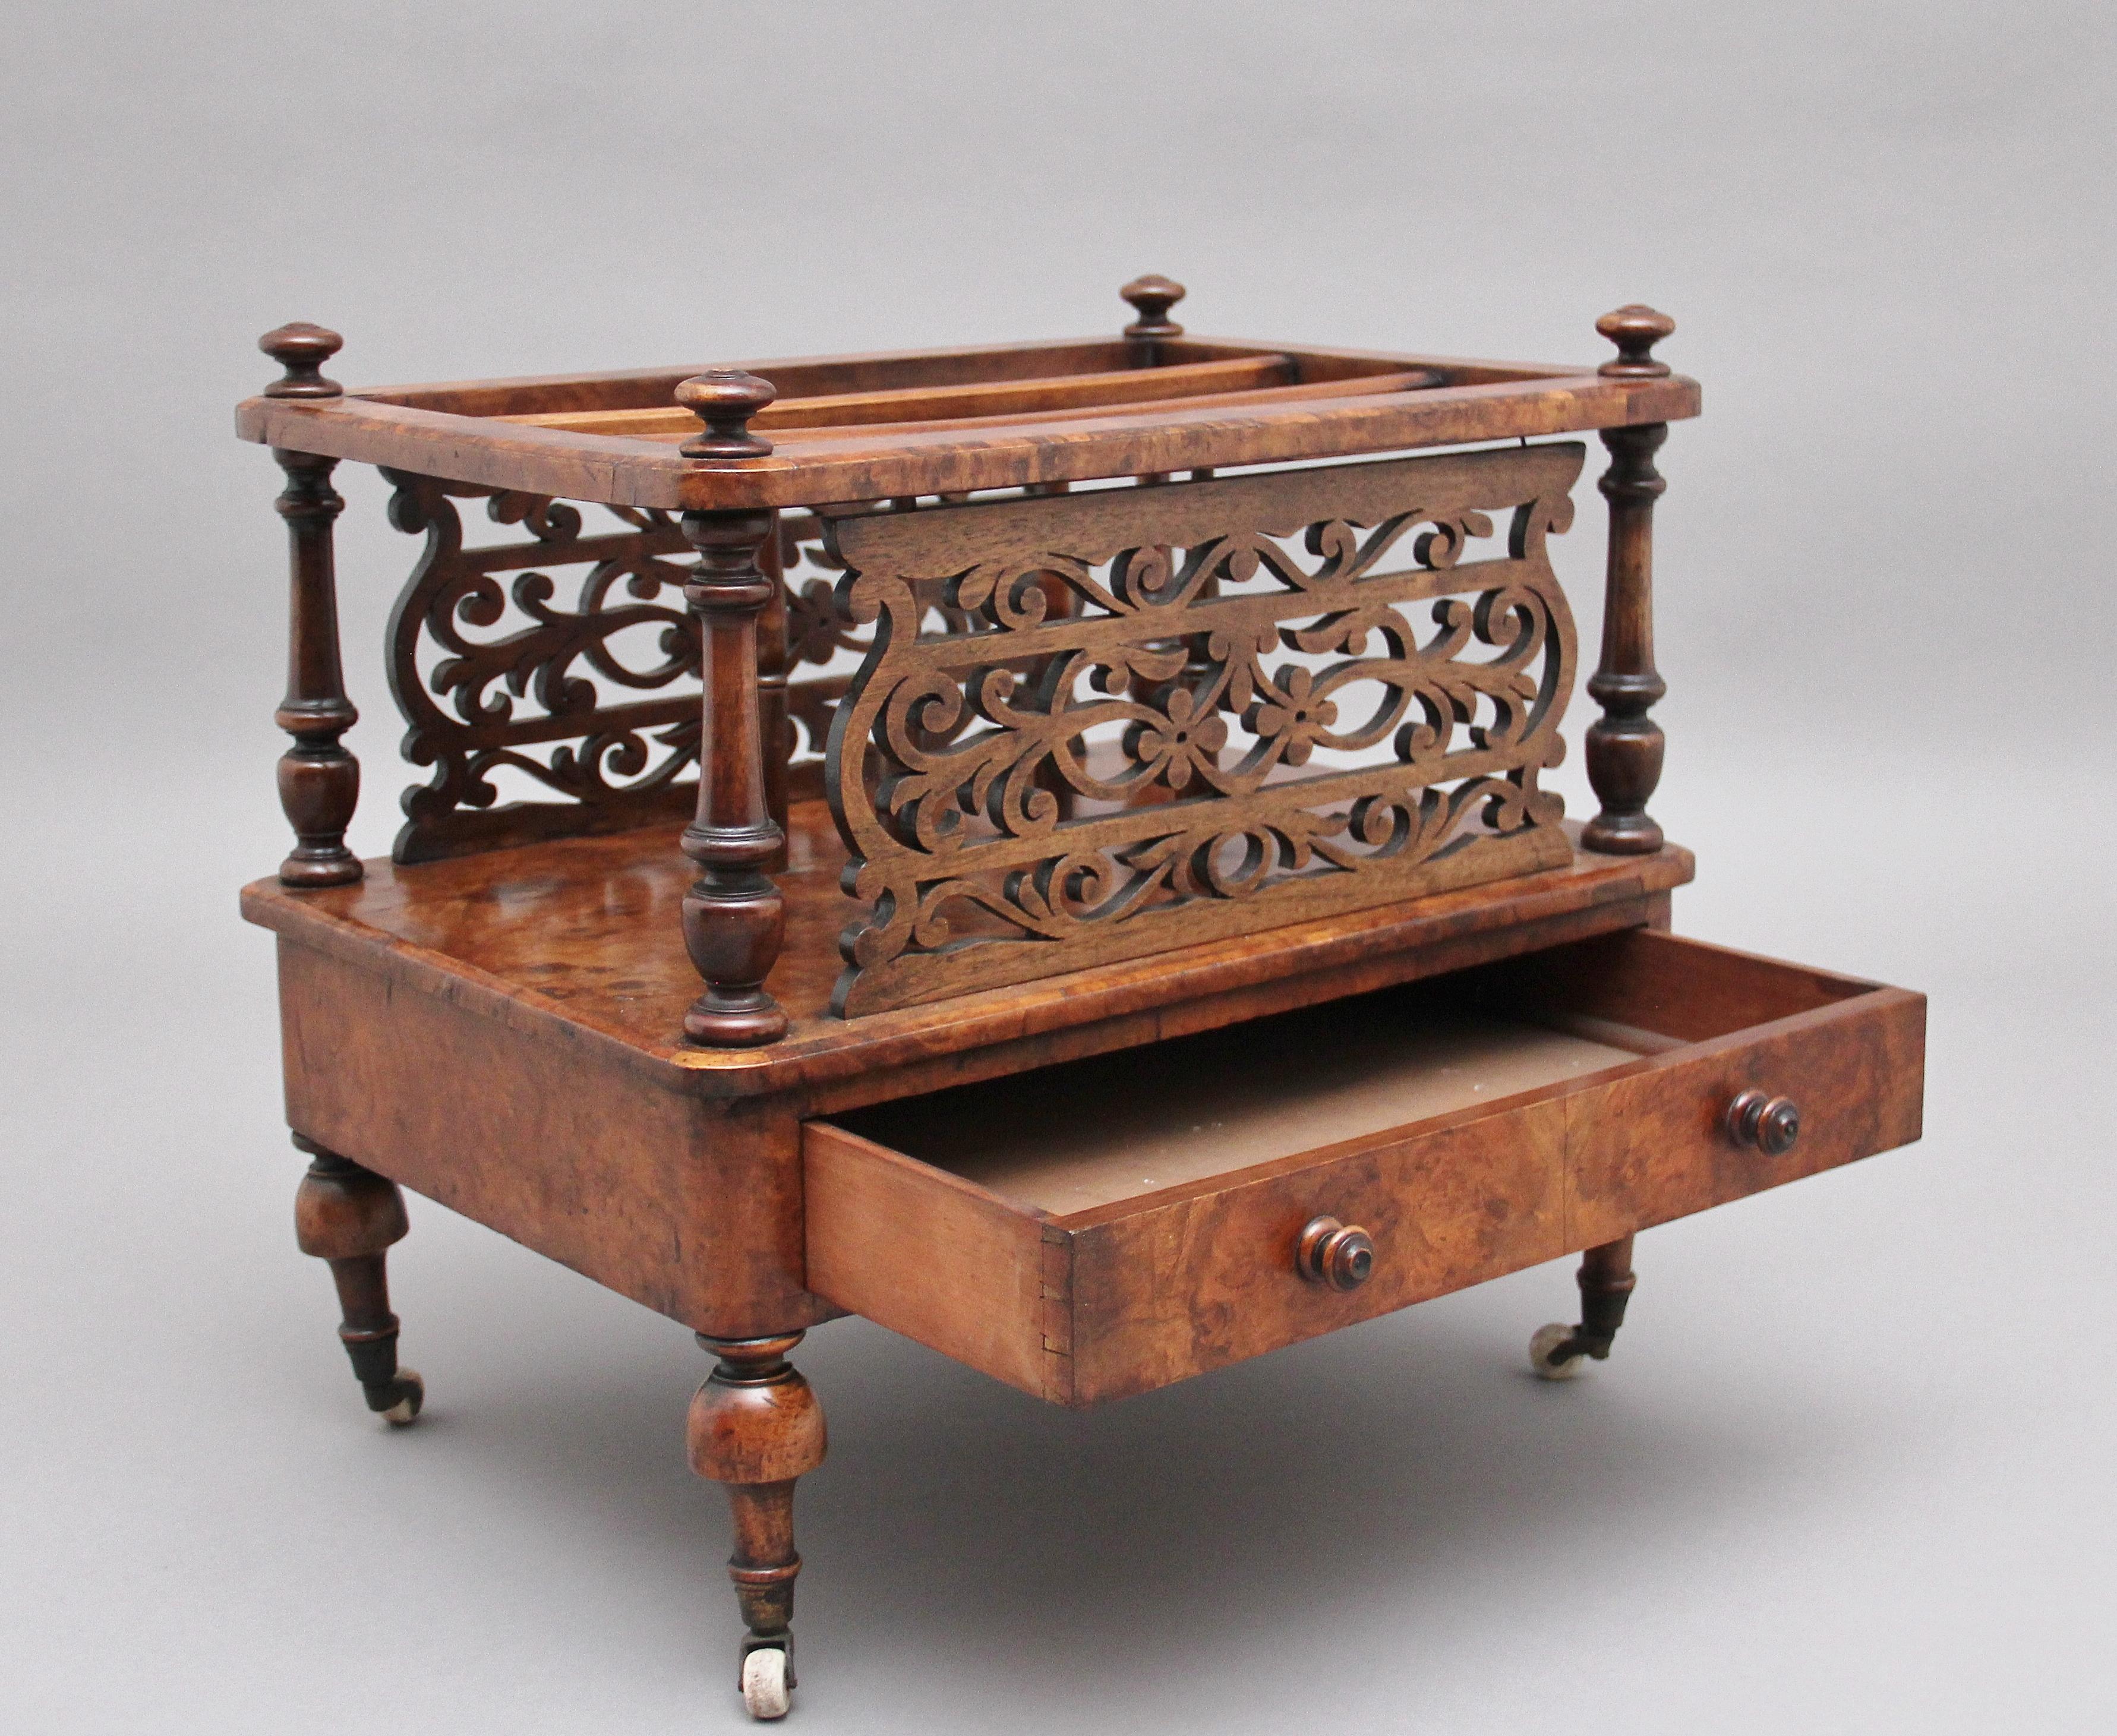 19th century burr walnut Canterbury, having three divisions which is divided by finely carved and pierced splats and turned columns, decorated with turned finials on the top in each corner, having a single mahogany lined drawer at the front with